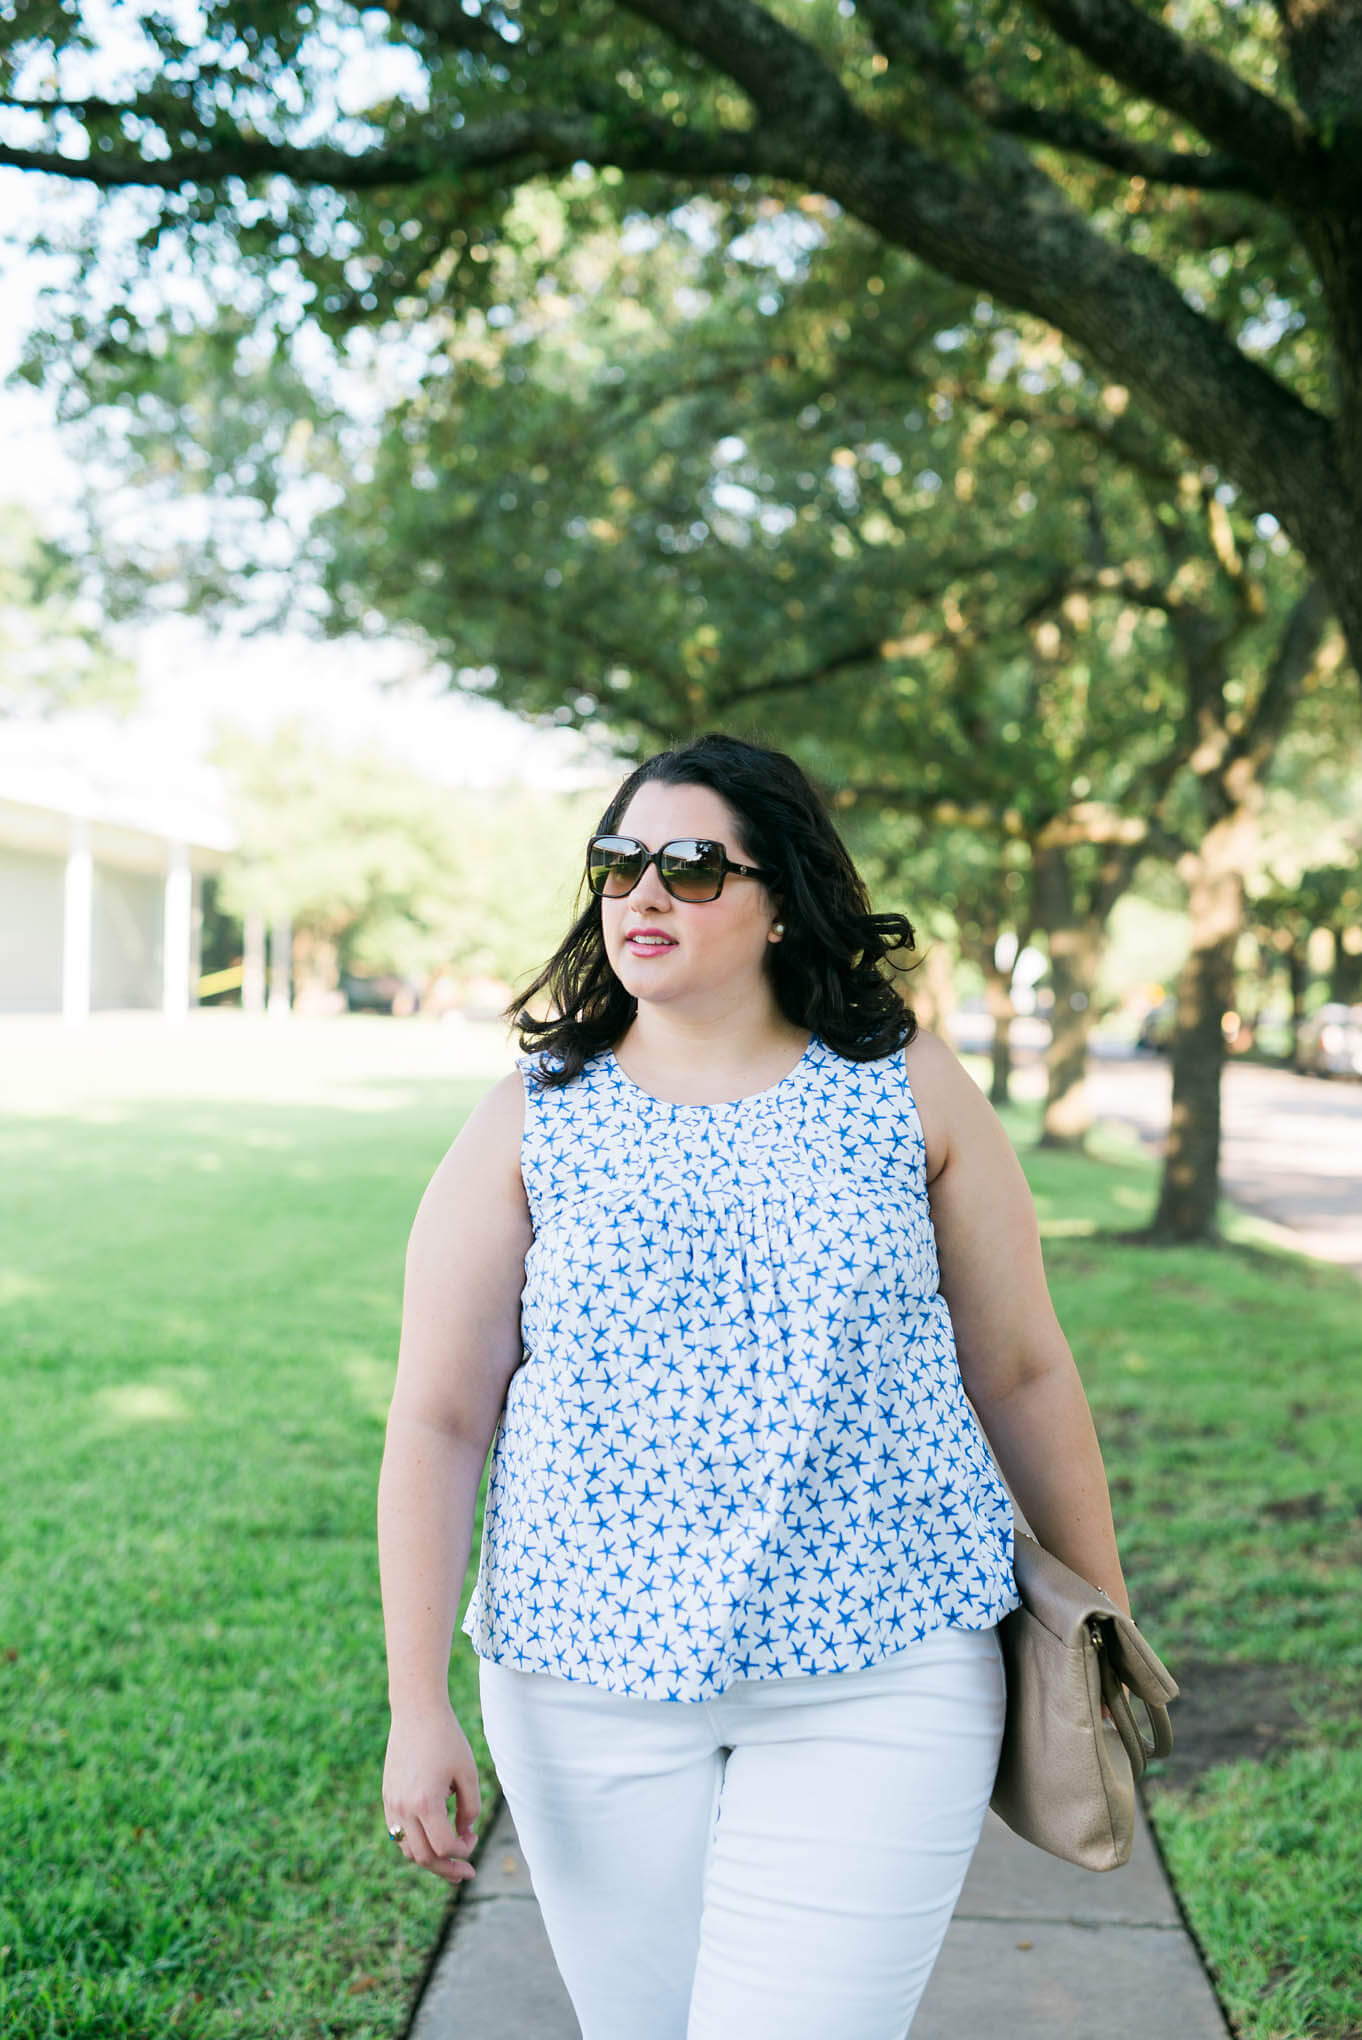 Kate Spade Summer Fun | Something Gold, Something Blue curvy style blog by Emily Bastedo | Plus Size Fashion, Summer fashion, What to wear in the summer, Kate Spade wedges, Melissa McCarthy Seven white capris, Elaine Turner purse, Chanel sunglasses